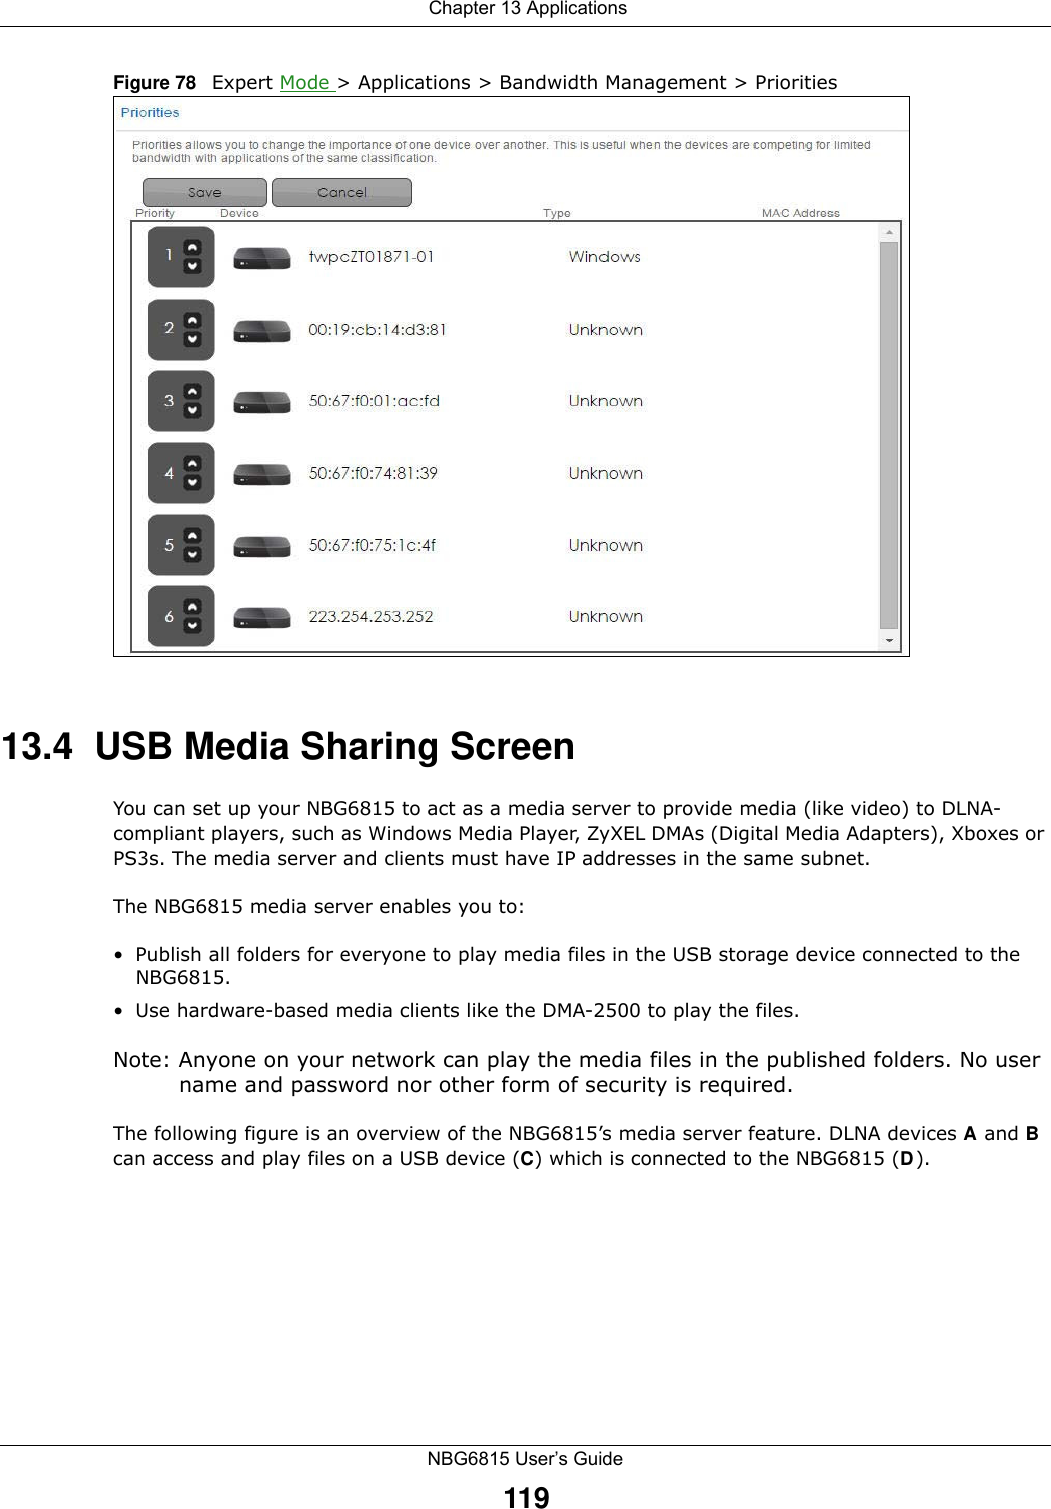  Chapter 13 ApplicationsNBG6815 User’s Guide119Figure 78   Expert Mode &gt; Applications &gt; Bandwidth Management &gt; Priorities 13.4  USB Media Sharing ScreenYou can set up your NBG6815 to act as a media server to provide media (like video) to DLNA-compliant players, such as Windows Media Player, ZyXEL DMAs (Digital Media Adapters), Xboxes or PS3s. The media server and clients must have IP addresses in the same subnet.The NBG6815 media server enables you to:• Publish all folders for everyone to play media files in the USB storage device connected to the NBG6815.• Use hardware-based media clients like the DMA-2500 to play the files.Note: Anyone on your network can play the media files in the published folders. No user name and password nor other form of security is required. The following figure is an overview of the NBG6815’s media server feature. DLNA devices A and B can access and play files on a USB device (C) which is connected to the NBG6815 (D).